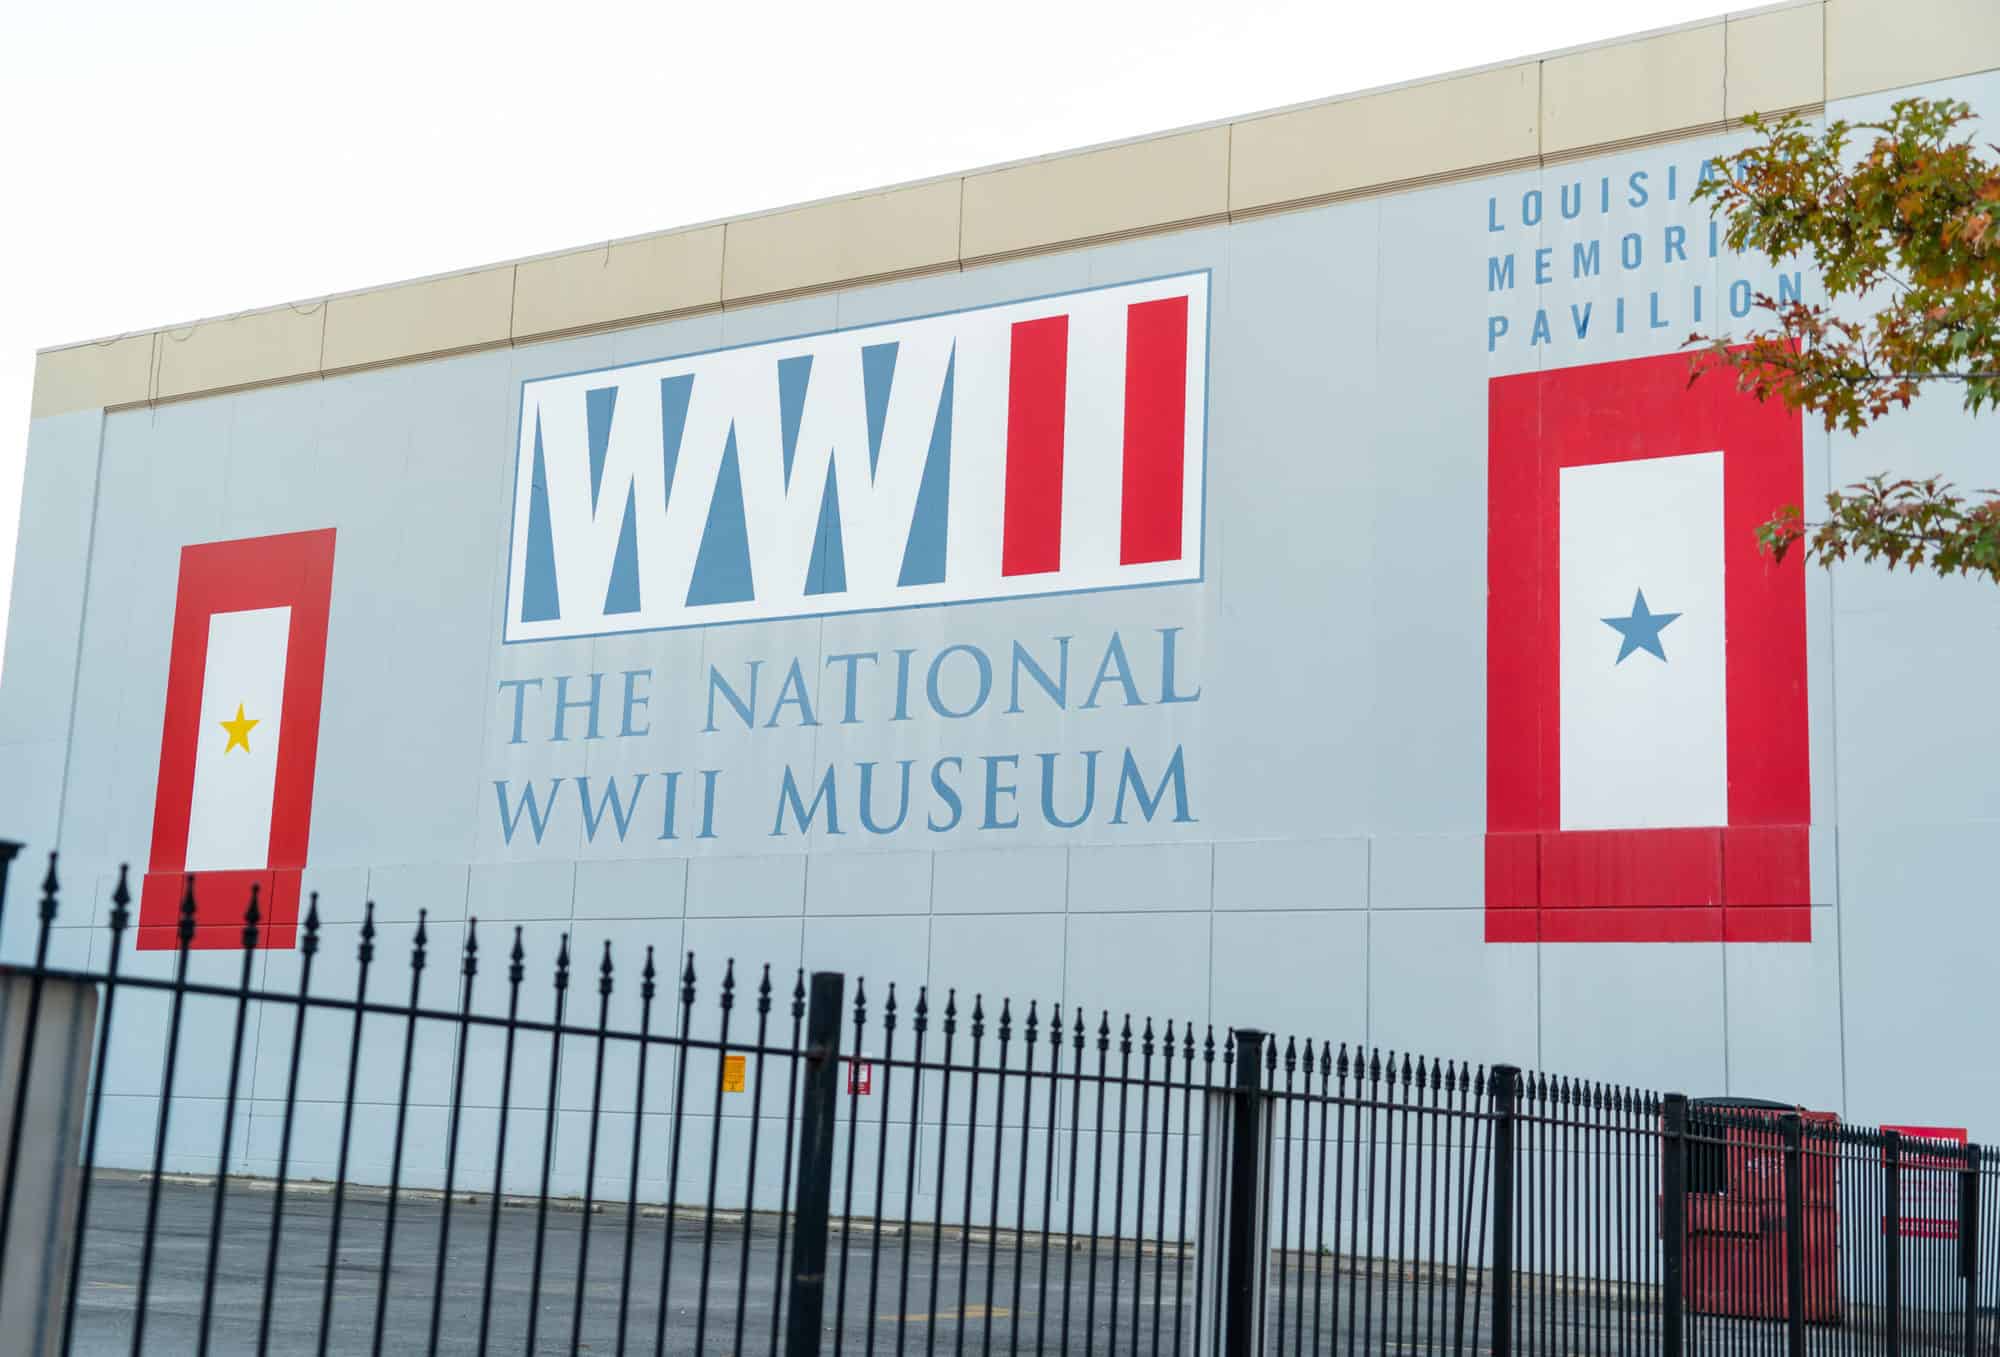 USA - Louisiana - New Orleans - WWII Museum